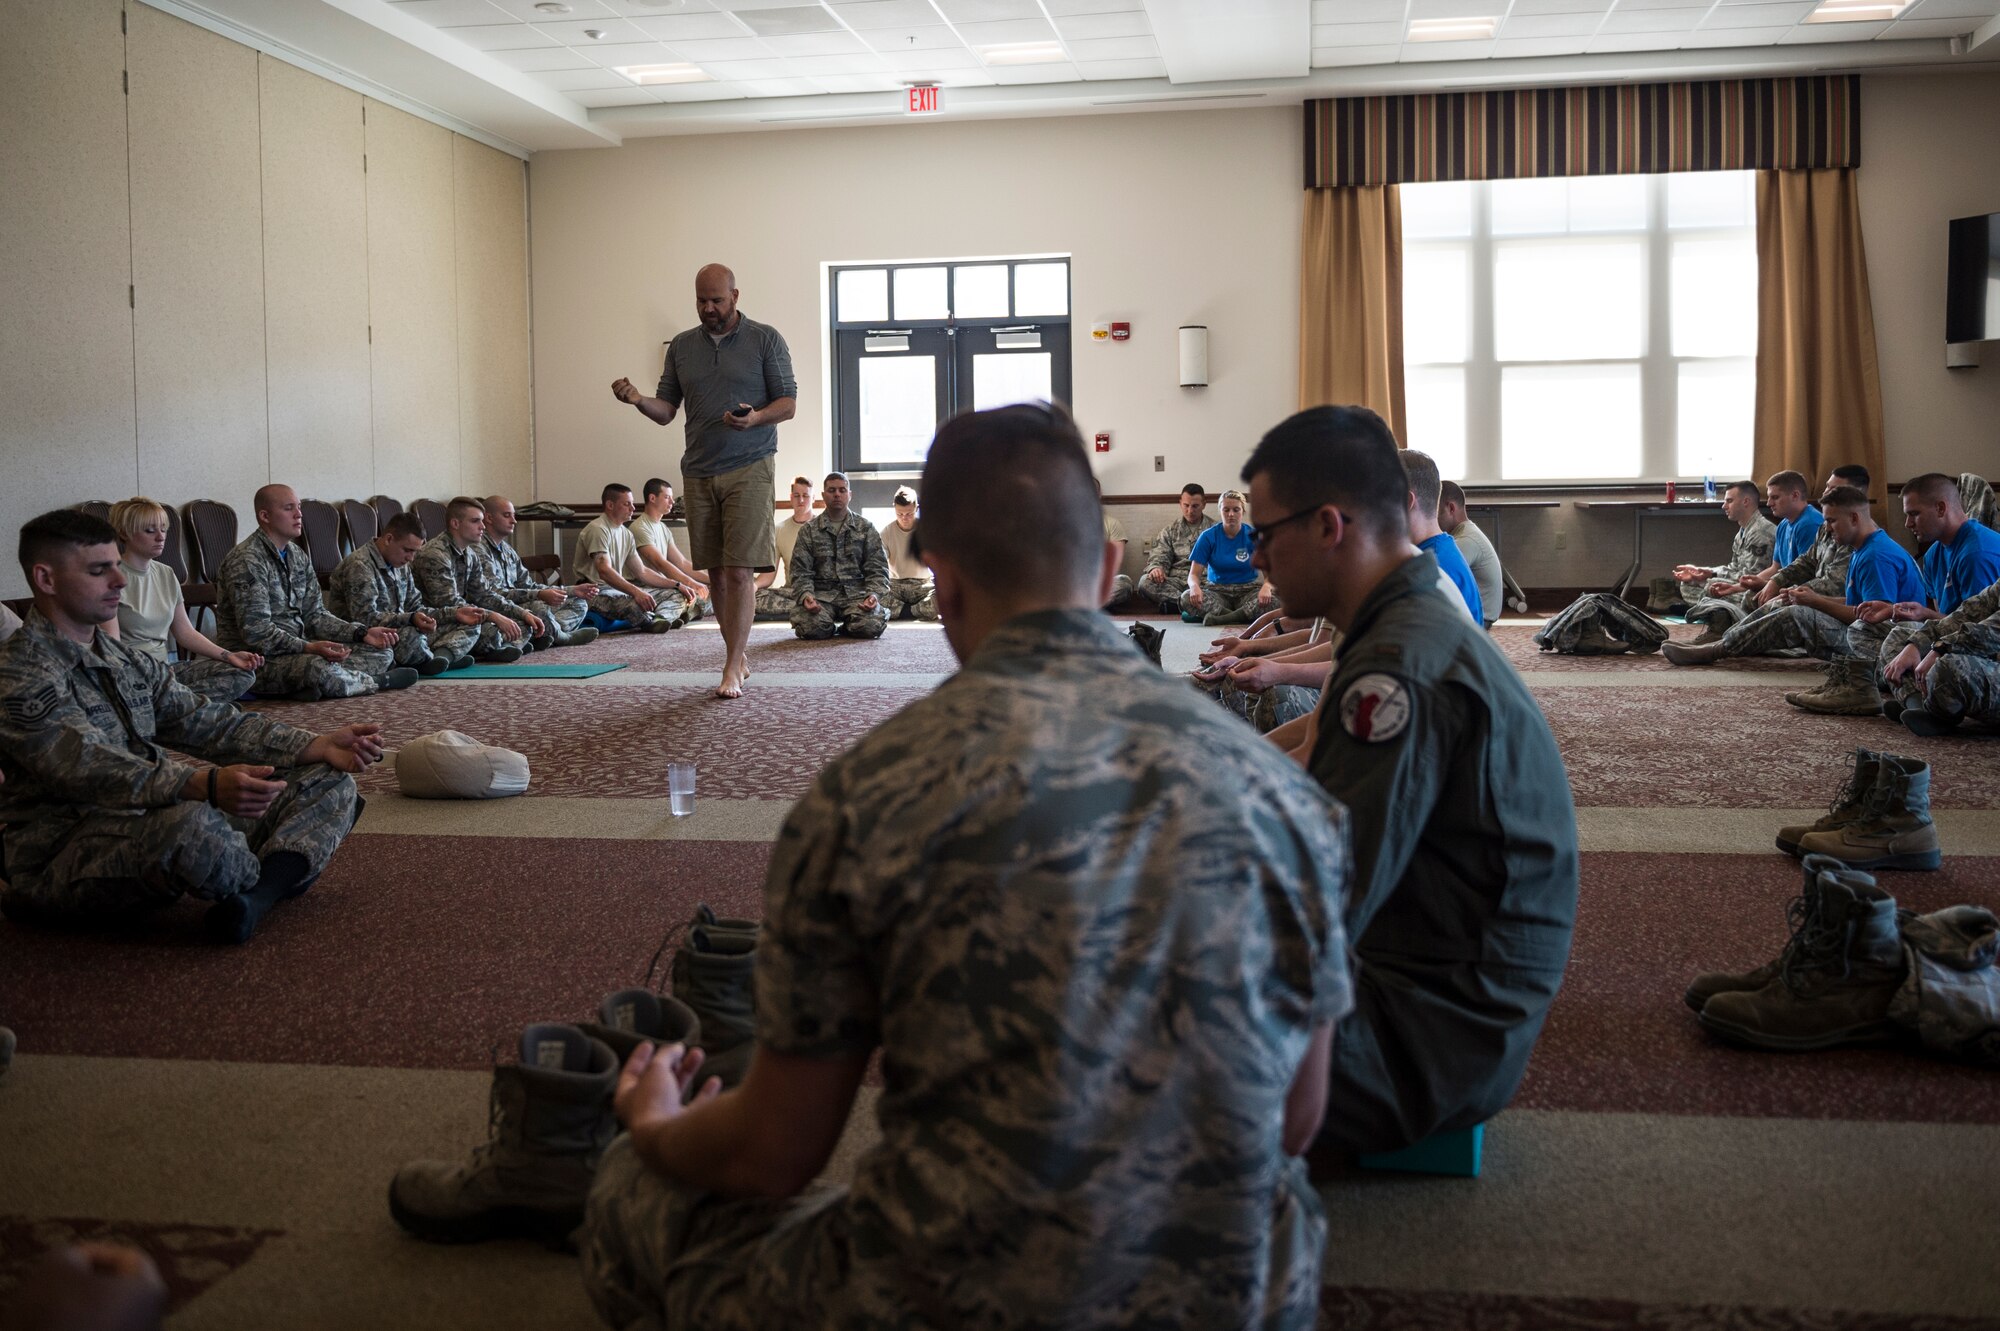 Airmen from the 107th Airlift Wing participate in a meditation class given by Soma Cura as part of Wellness Week at Niagara Falls Air Reserve Station, June 10, 2016. Soma Cura, a local wellness center, was on base offering introductory classes to mediation as well as yoga, as part of the various classes taking part during Wellness Week. (U.S. Air National Guard photo by Staff Sgt. Ryan Campbell/released)